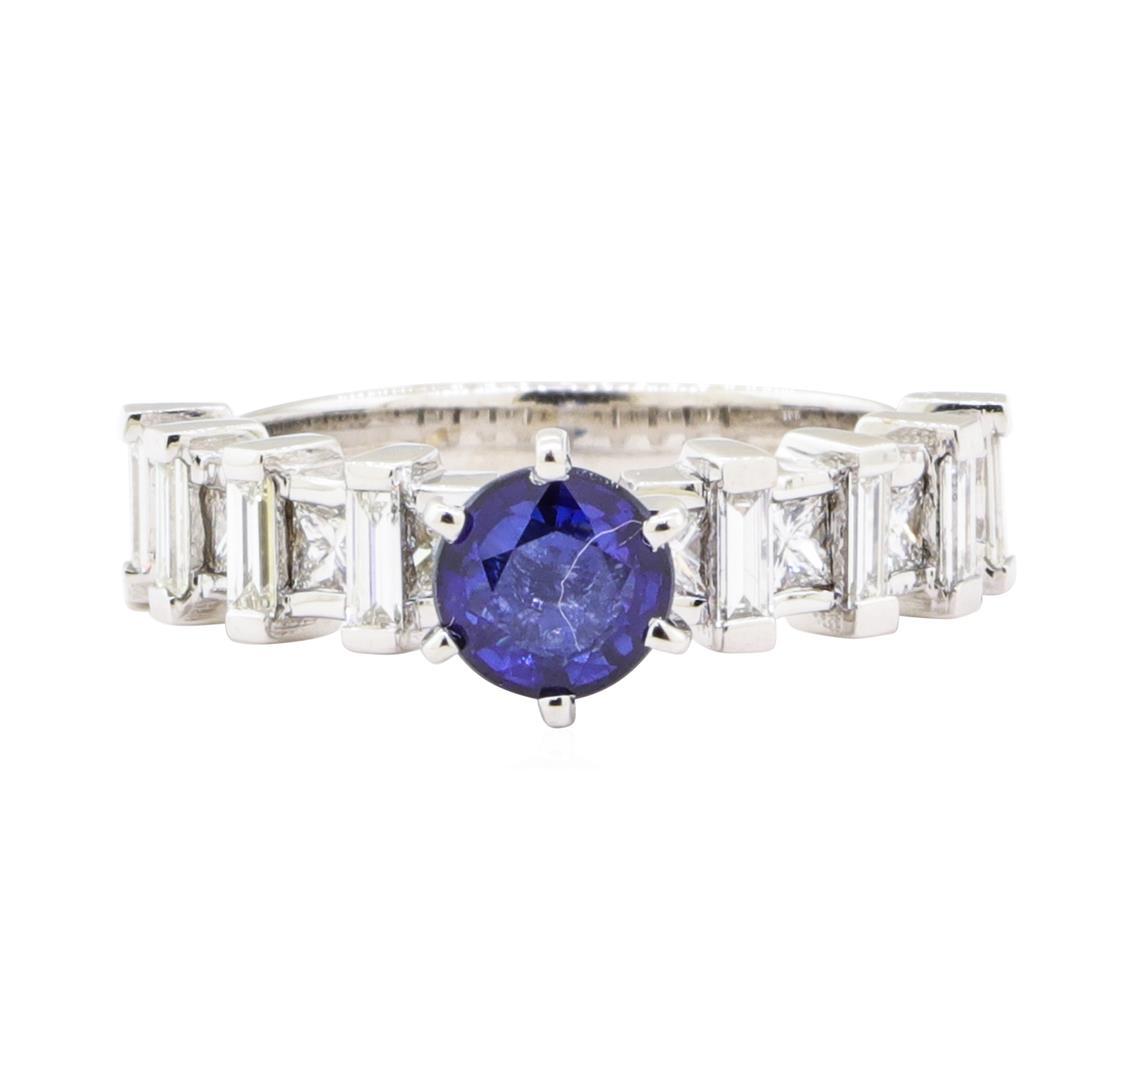 2.20 ctw Sapphire And Diamond Ring - 18KT White Gold